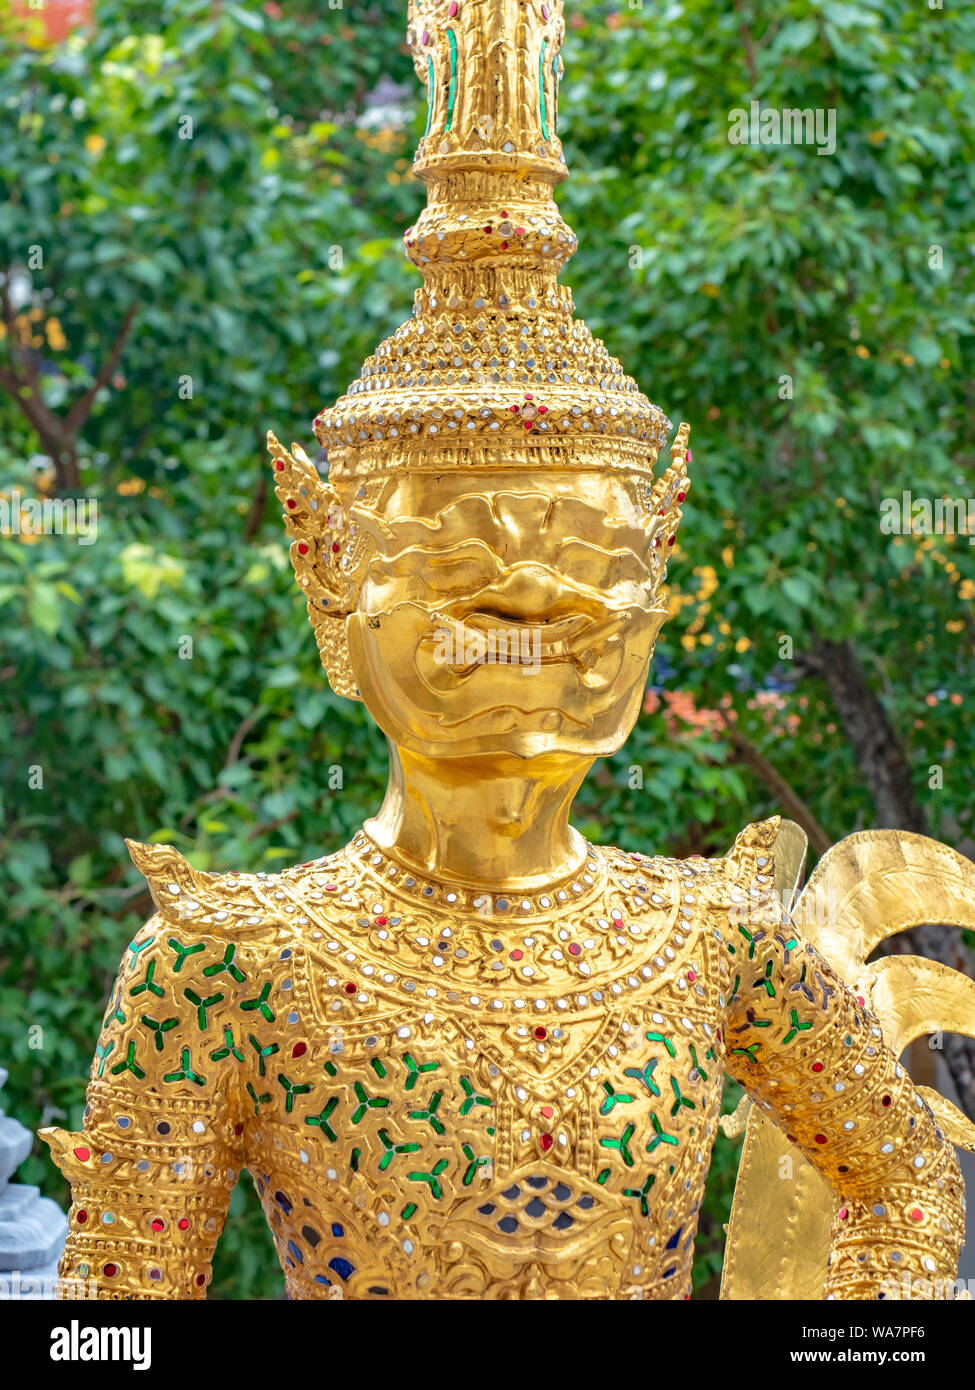 Colourful and Golden sculpture and statues of Temple of Emerald Buddha, Wat Phra Kaew, Grand Royal Palace in Bangkok, Thailand. Stock Photo